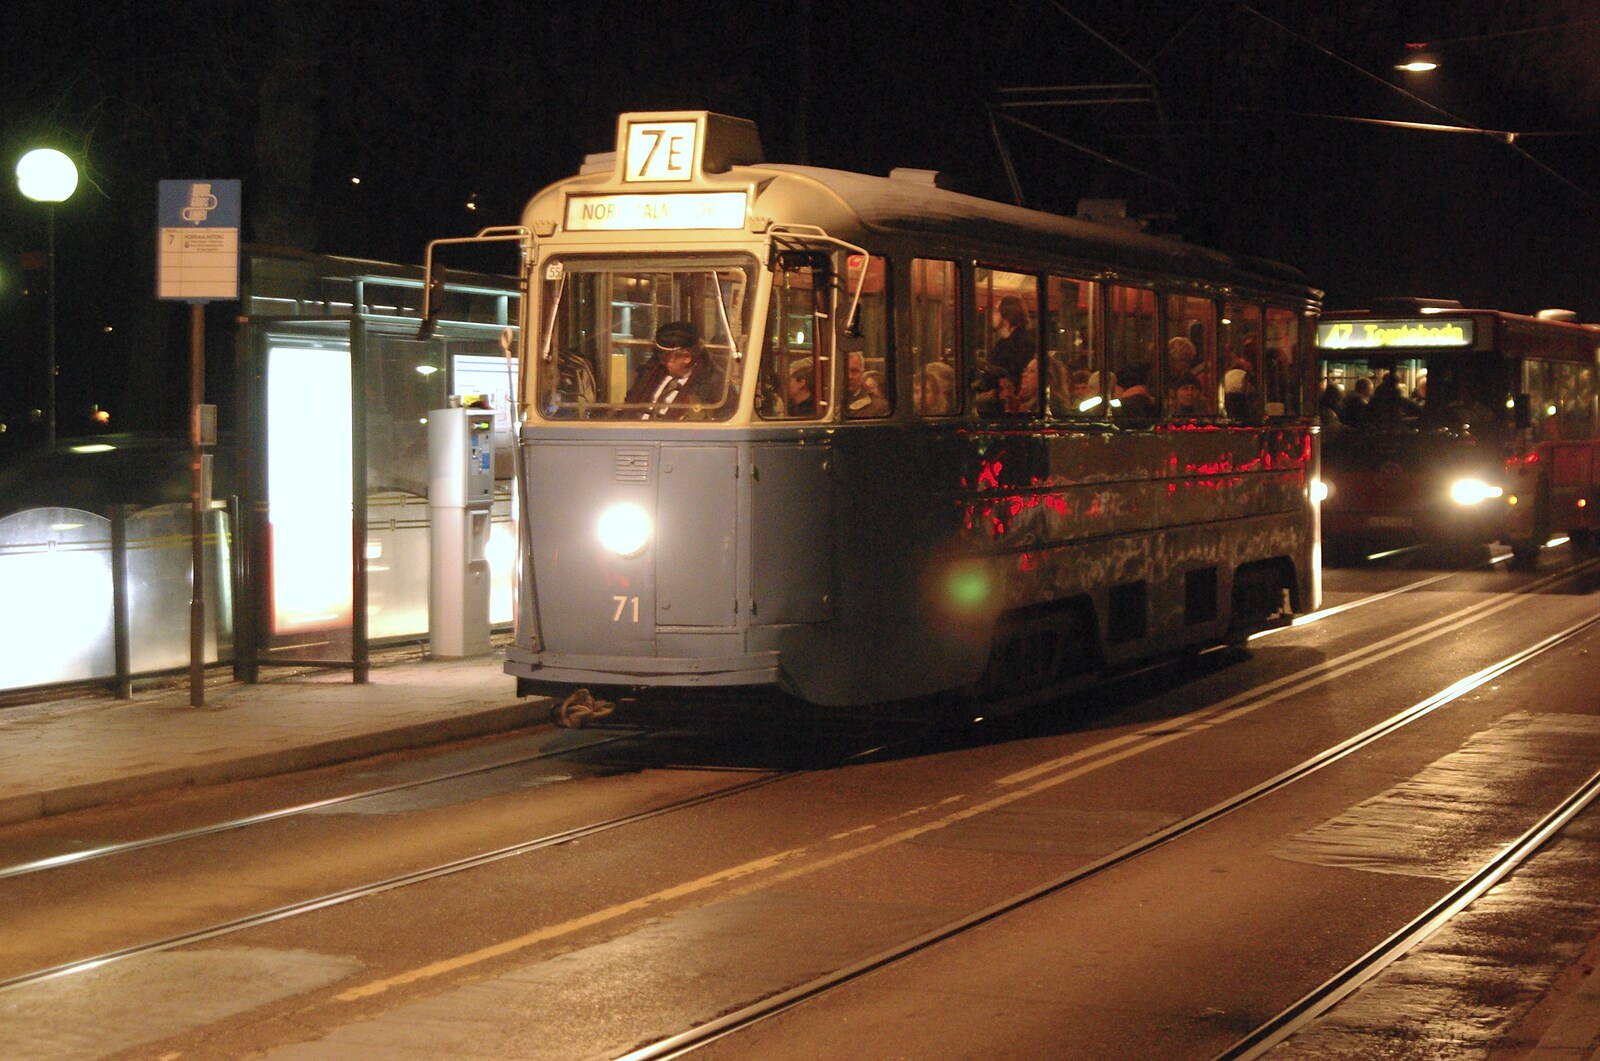 A tram waits outside the Natural History museum from A Few Hours in Skansen, Stockholm, Sweden - 17th December 2007